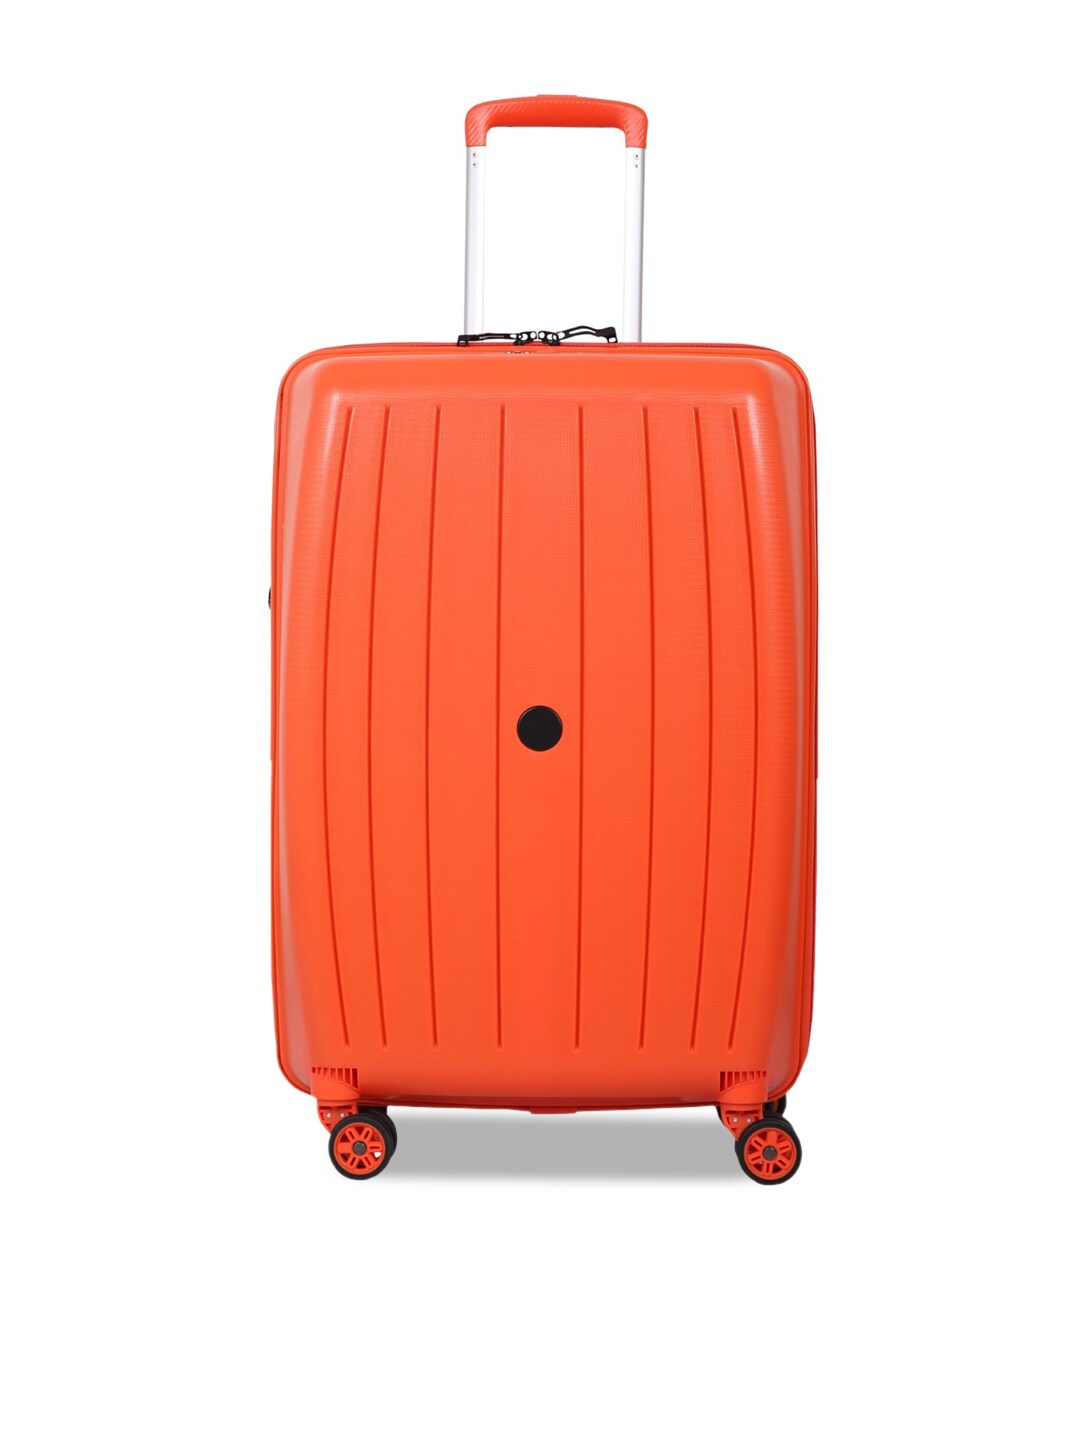 Polo Class Orange 20 Inch Trolley Bag Price in India